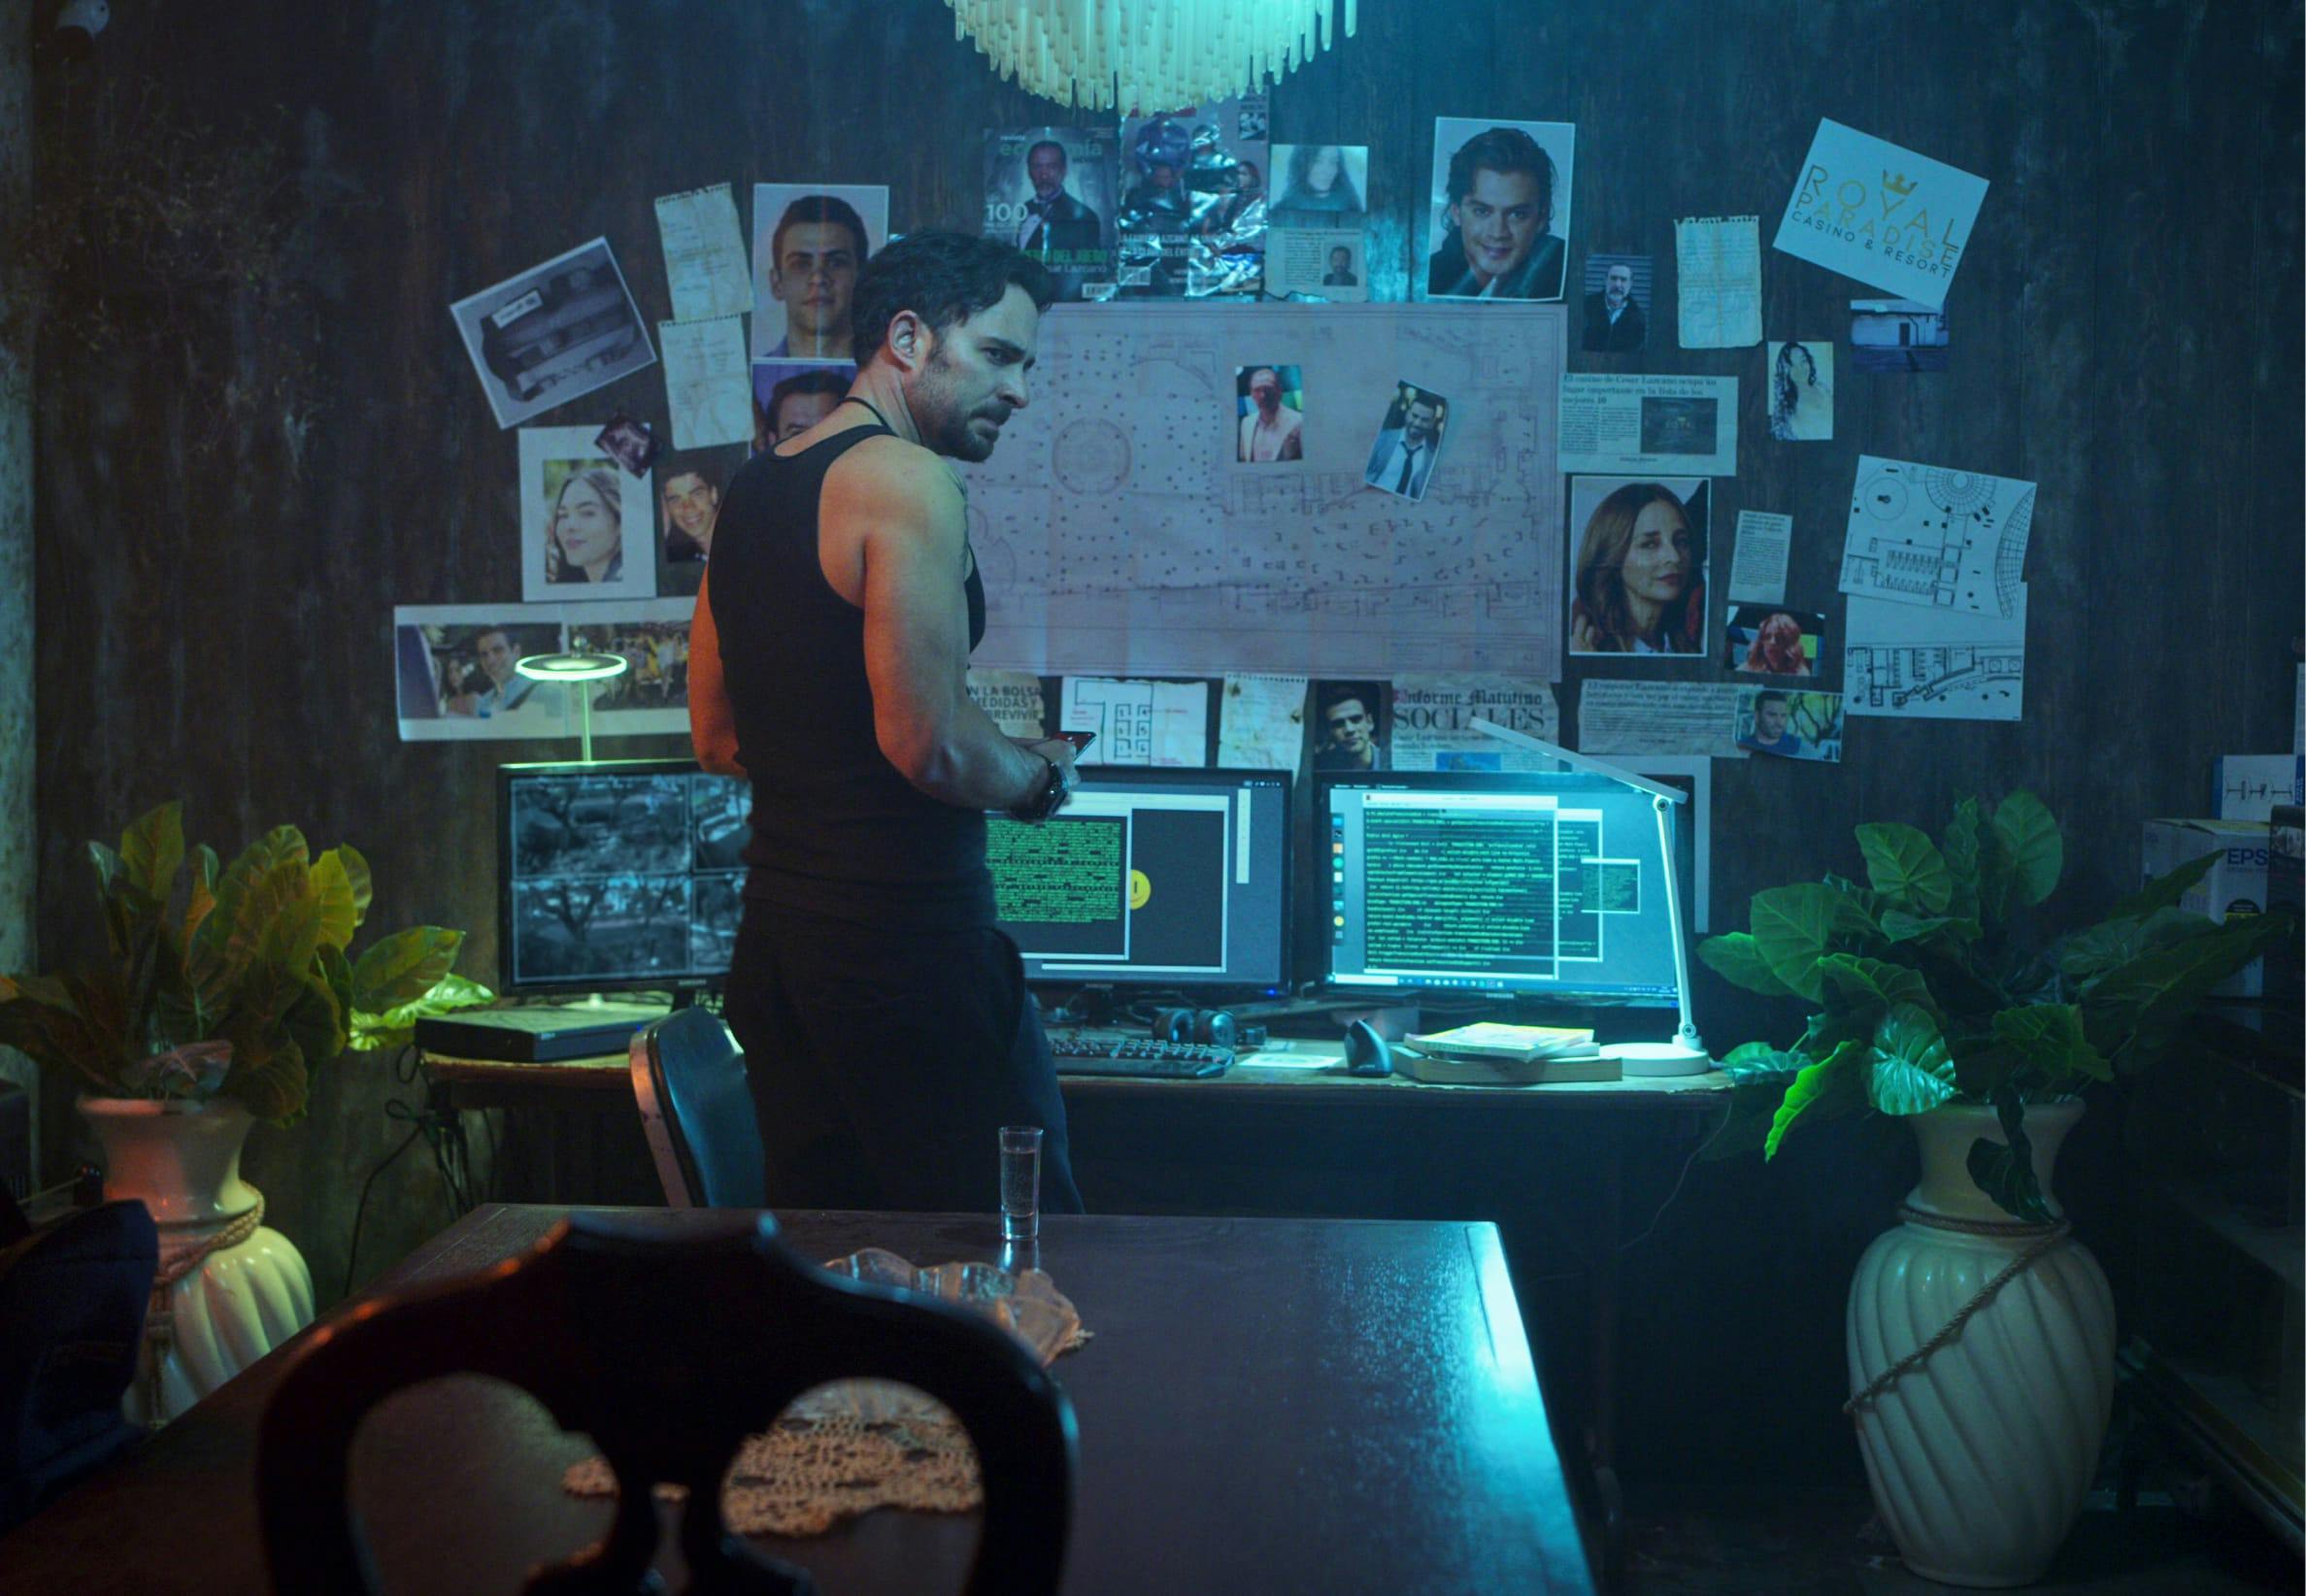 A man stands in front of a display of computers, pictures taped to the wall, and a map. He wears a black tank top and black pants, and has a sinister look on his face. There are plants flanking the table, and the room is lit with eerie blue light.